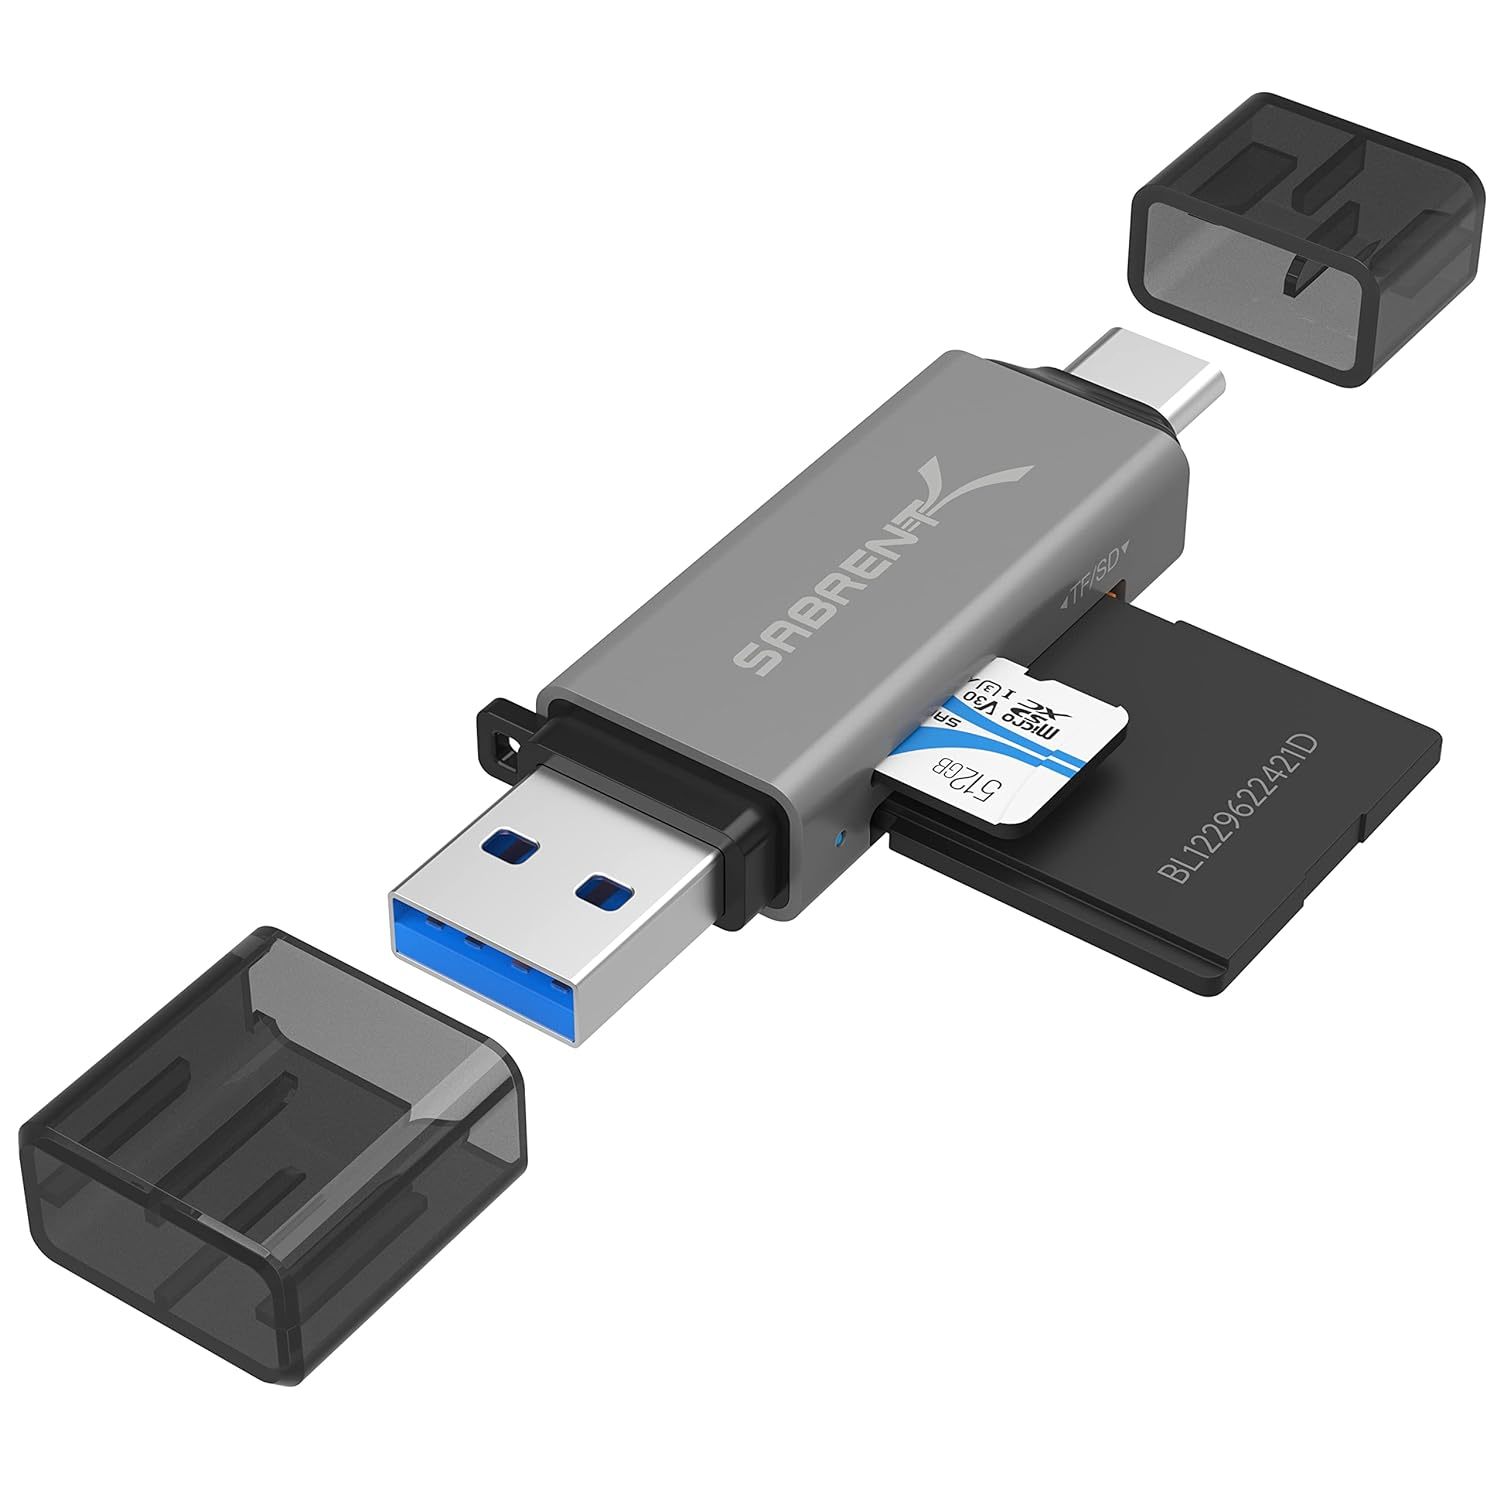 Primary image for SABRENT USB 3.0 and USB Type-C OTG Card Reader Supports SD, SDHC, SDXC, MMC/Micr